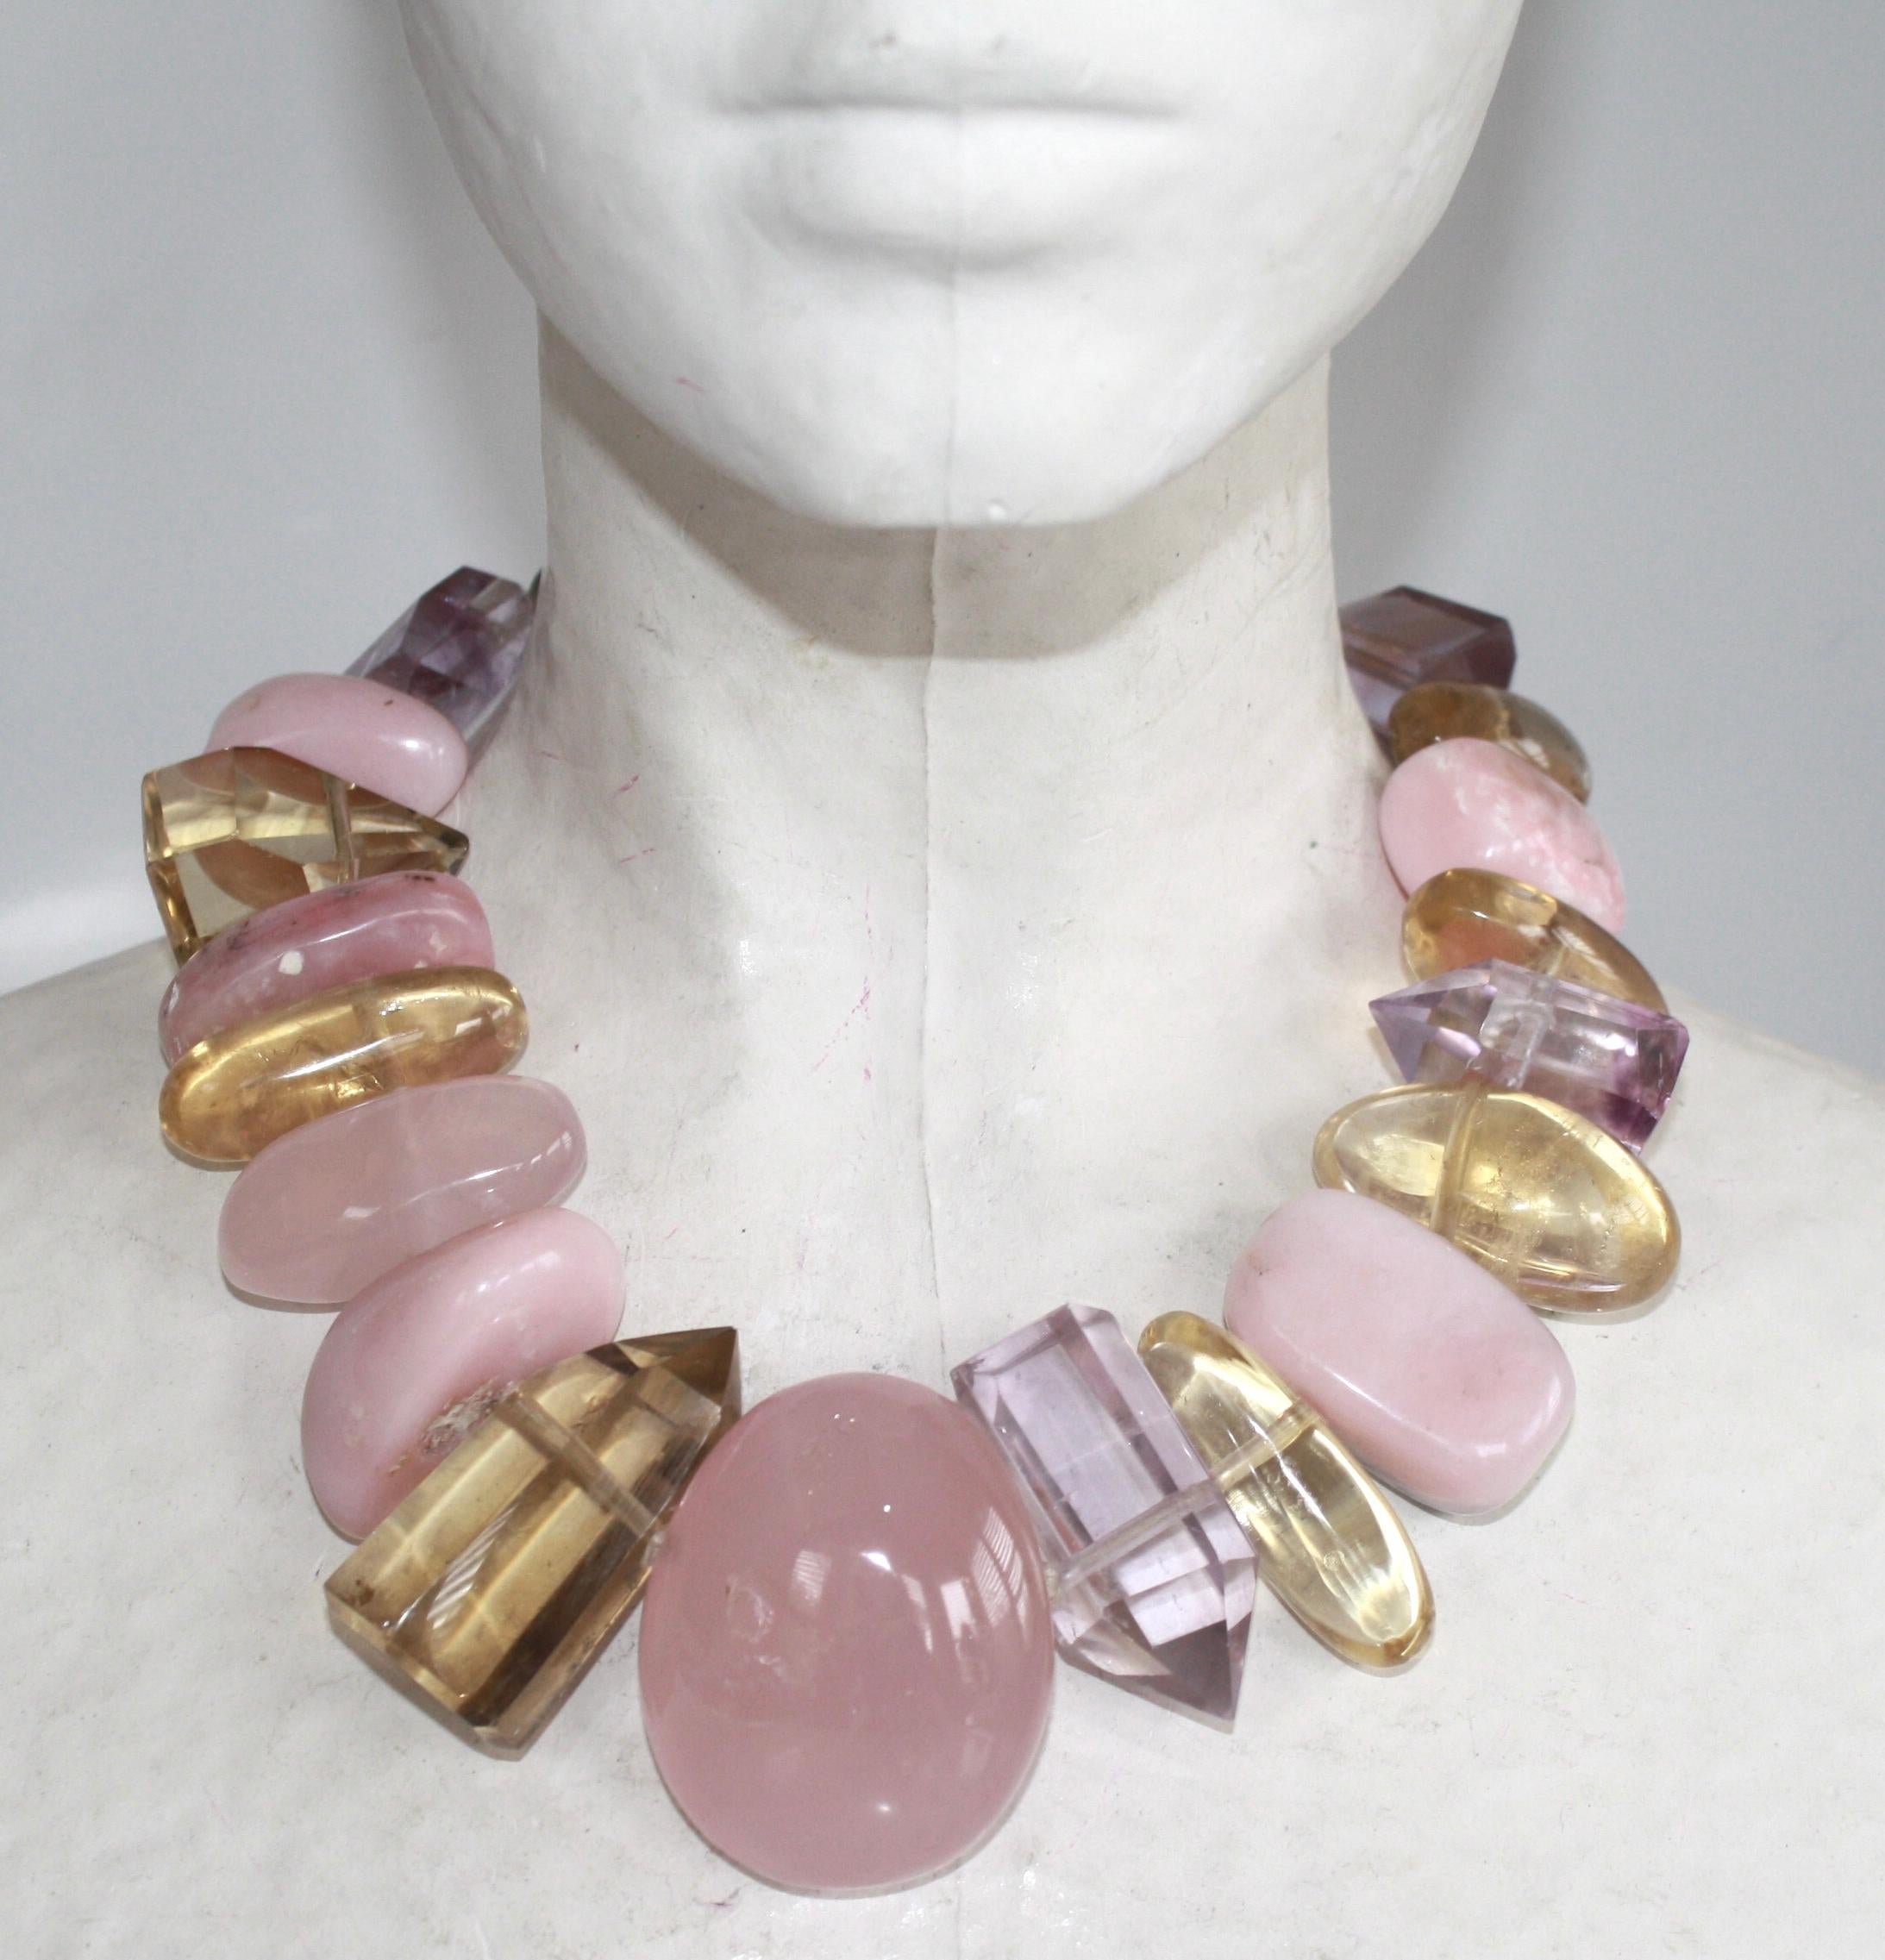 Rose quartz, amethyst, citrine,  opal, and leather one of a kind necklace from Monies Denmark. 